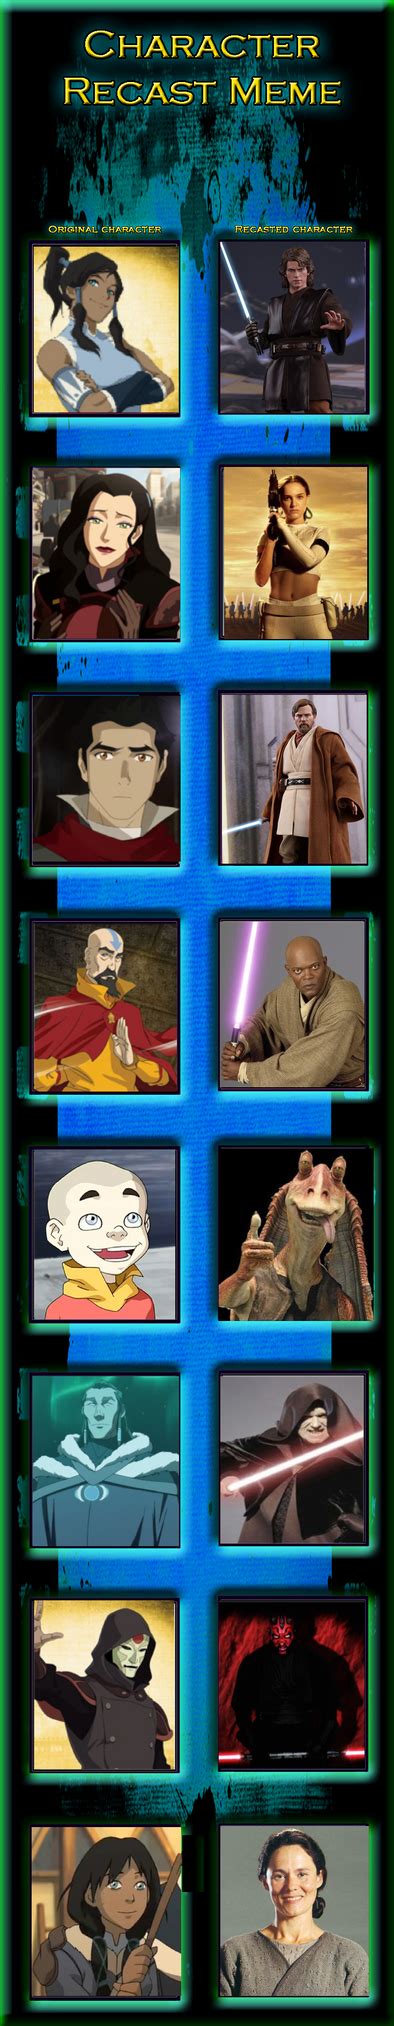 Character Re Cast Meme 12 Alokstar Wars Prequel By Spider Bat700 On